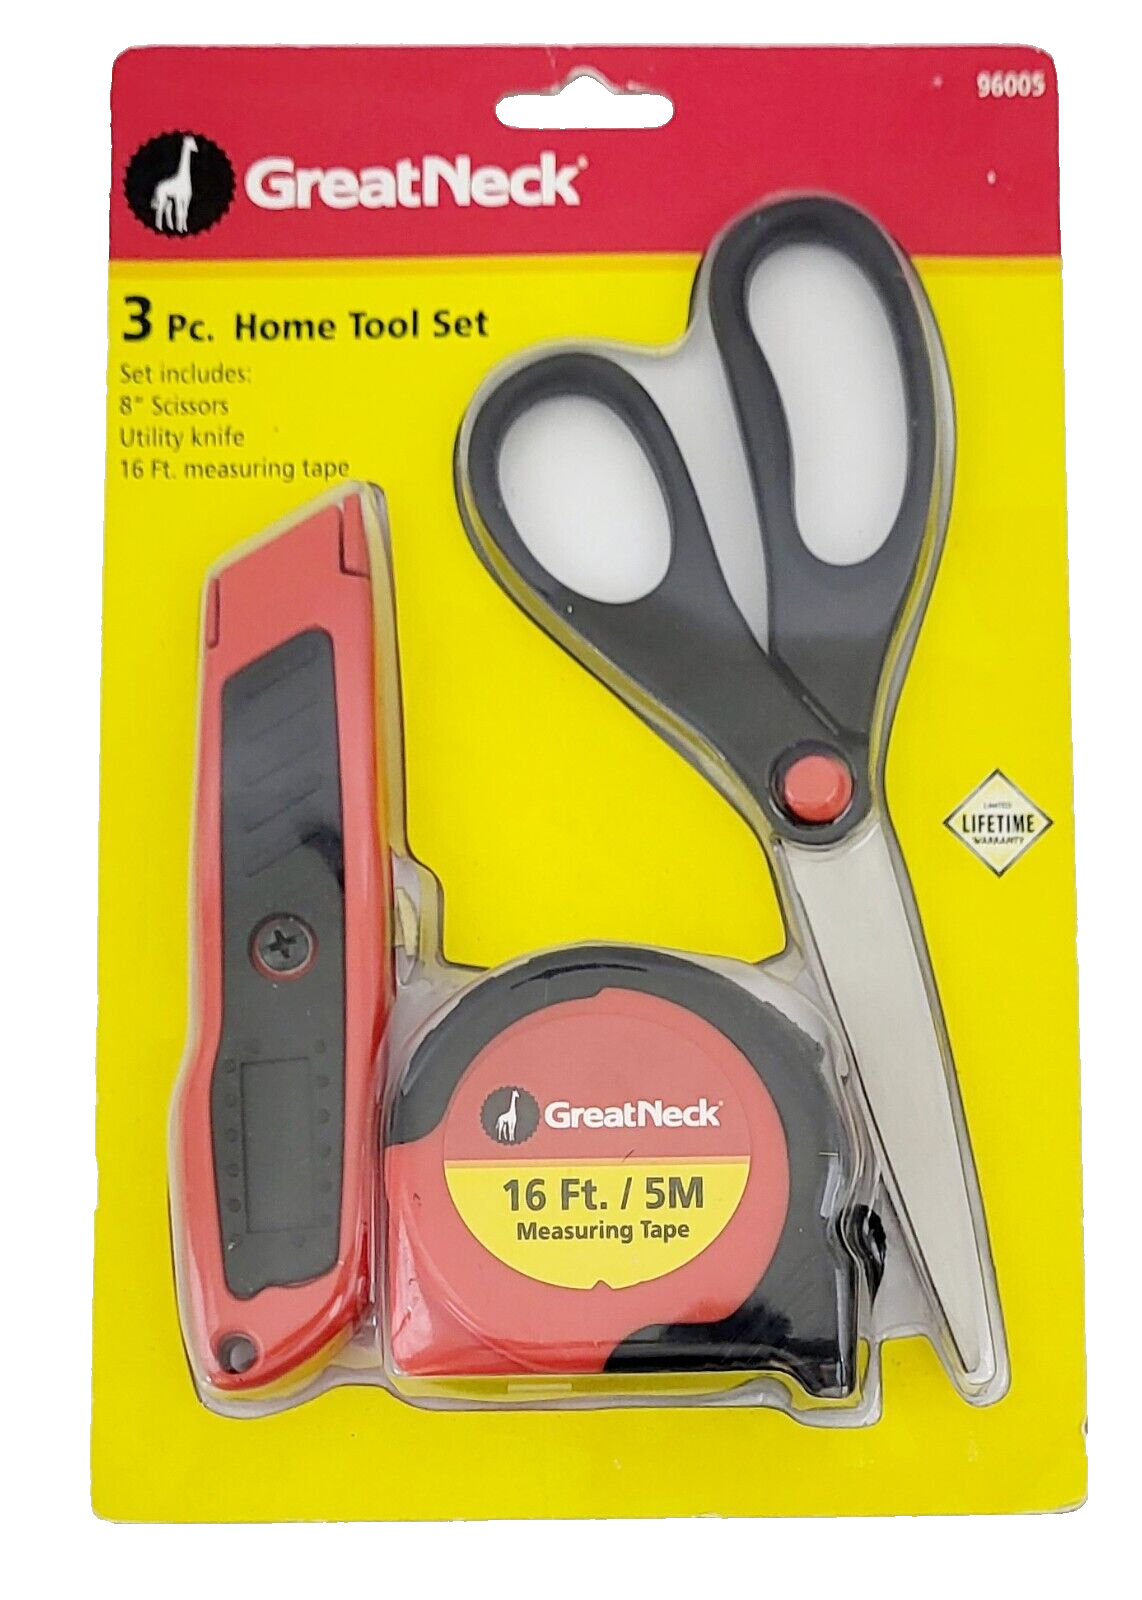 Household Tool Set Great Neck Home Tools 3 Pc. - $15.13